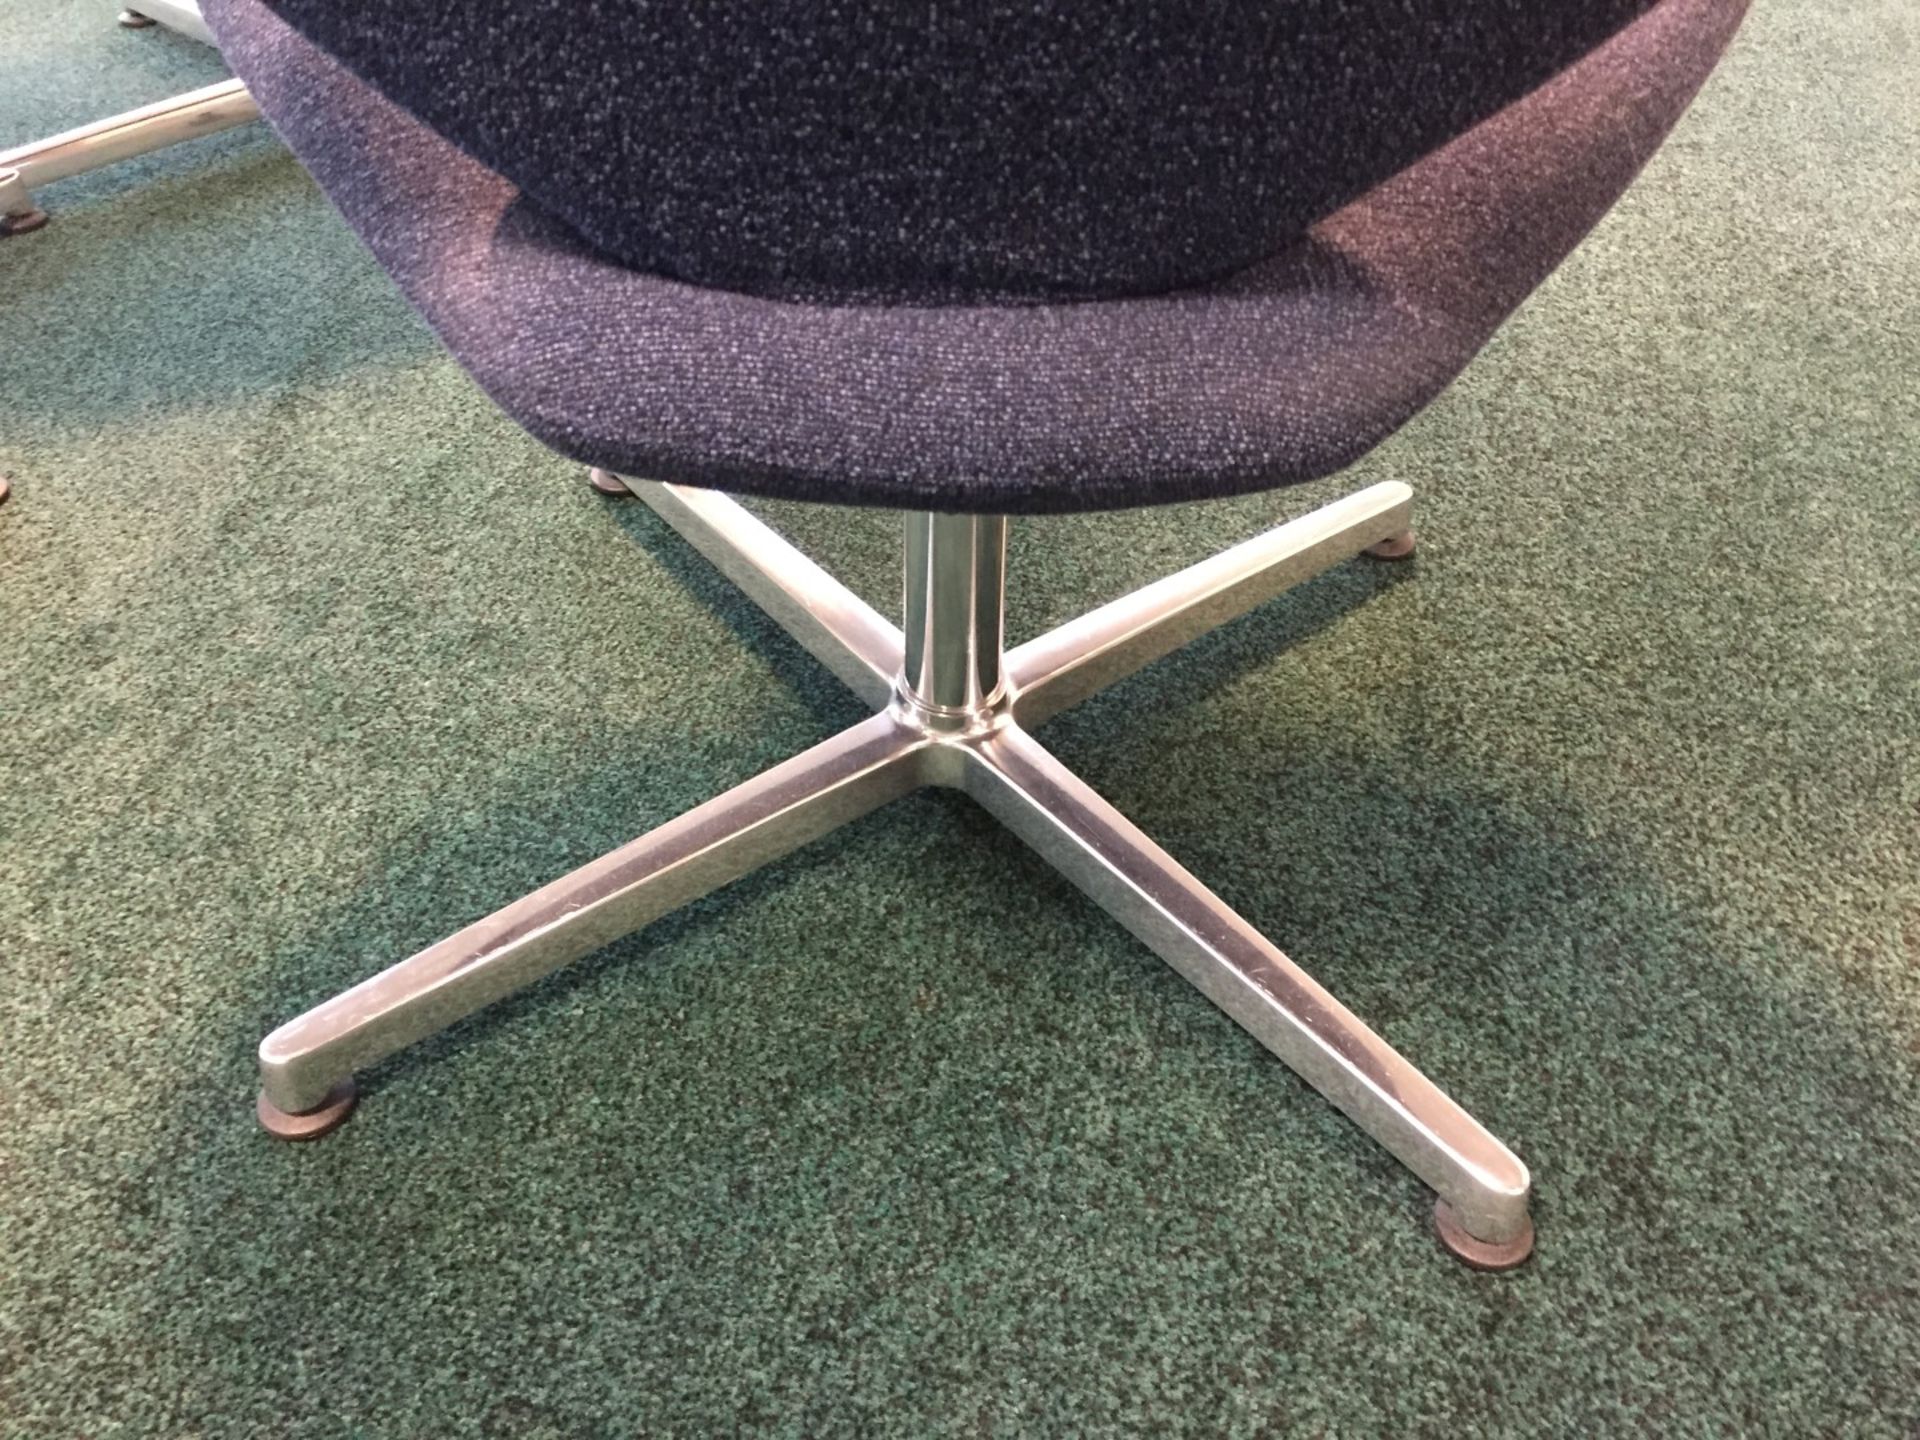 1 x Contemporay Office Chair With Hard Wearing Grey Fabric Upholstery and Chrome Cross Feet Base - - Image 6 of 6